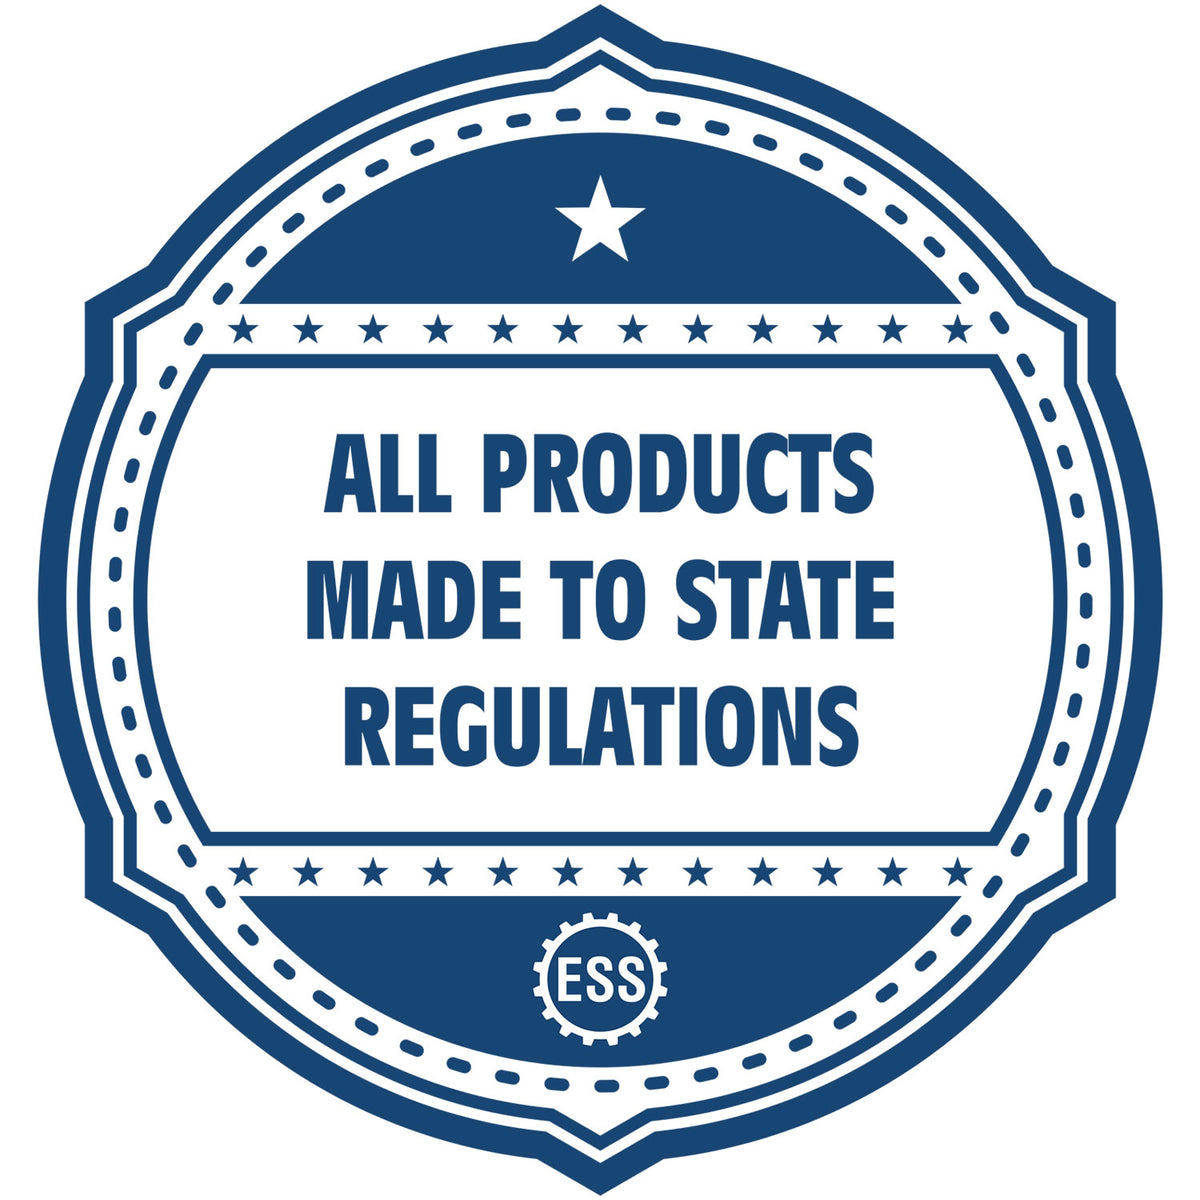 A blue icon or badge for the Self-Inking Oklahoma Geologist Stamp showing that this product is made in compliance with state regulations.